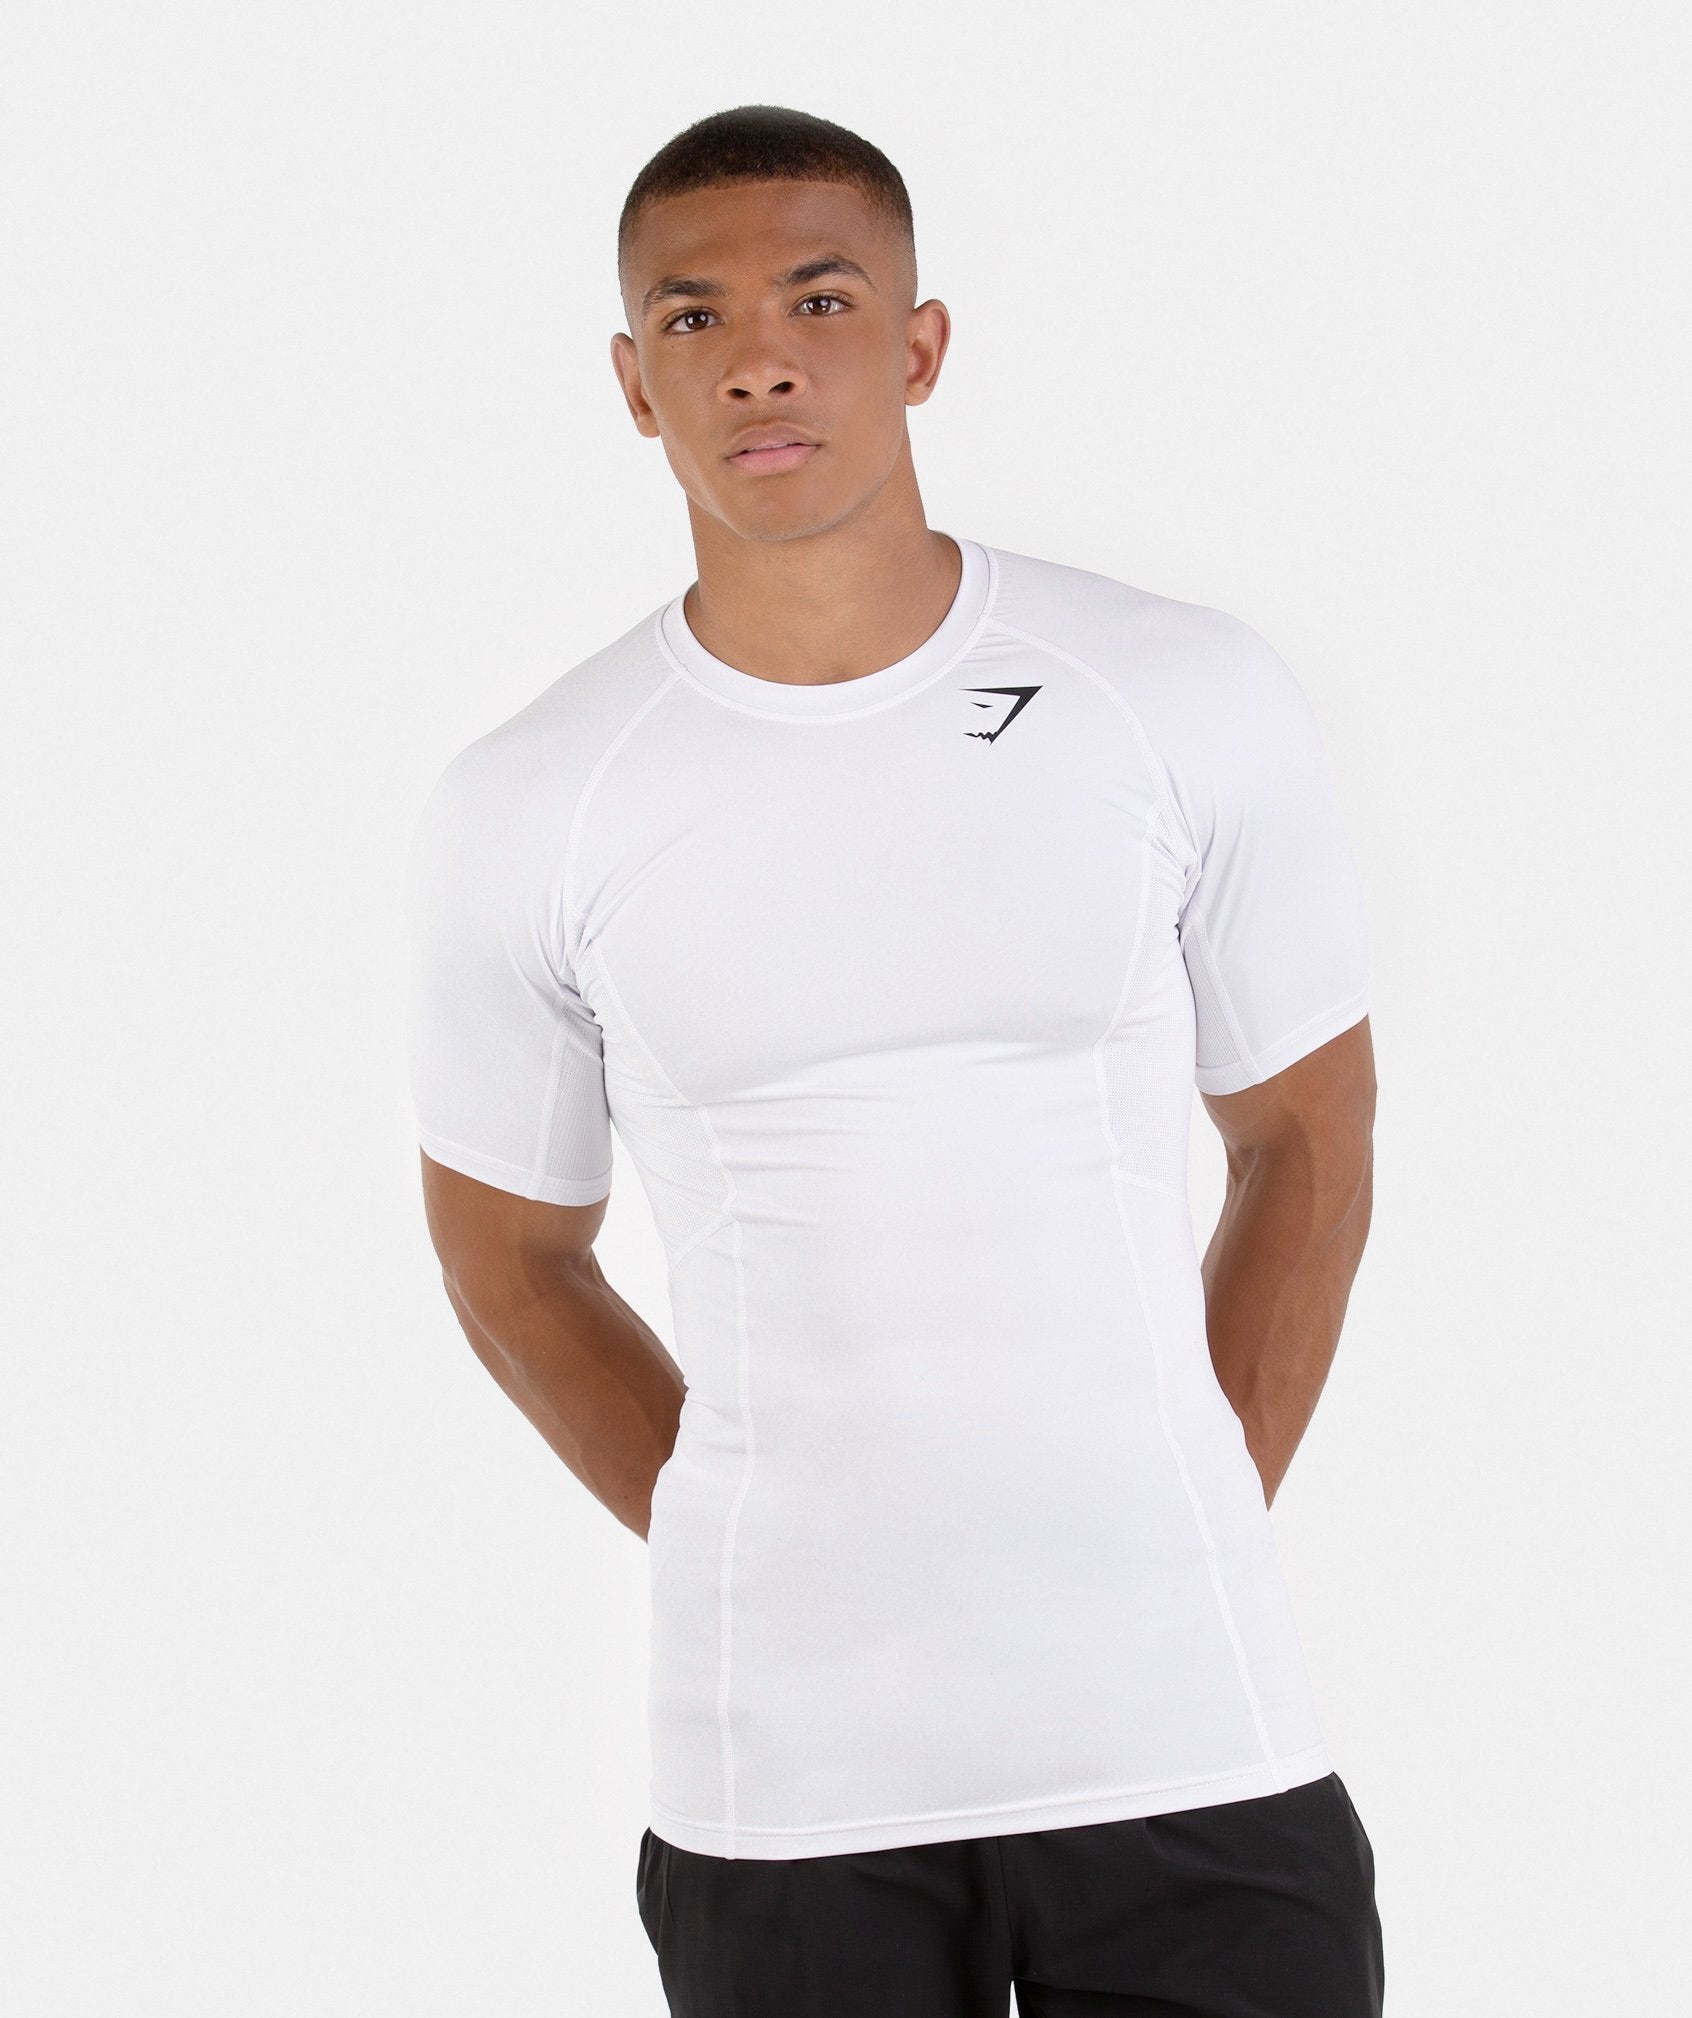 The Element Baselayer Short Sleeve Top boasts mesh ventilation to